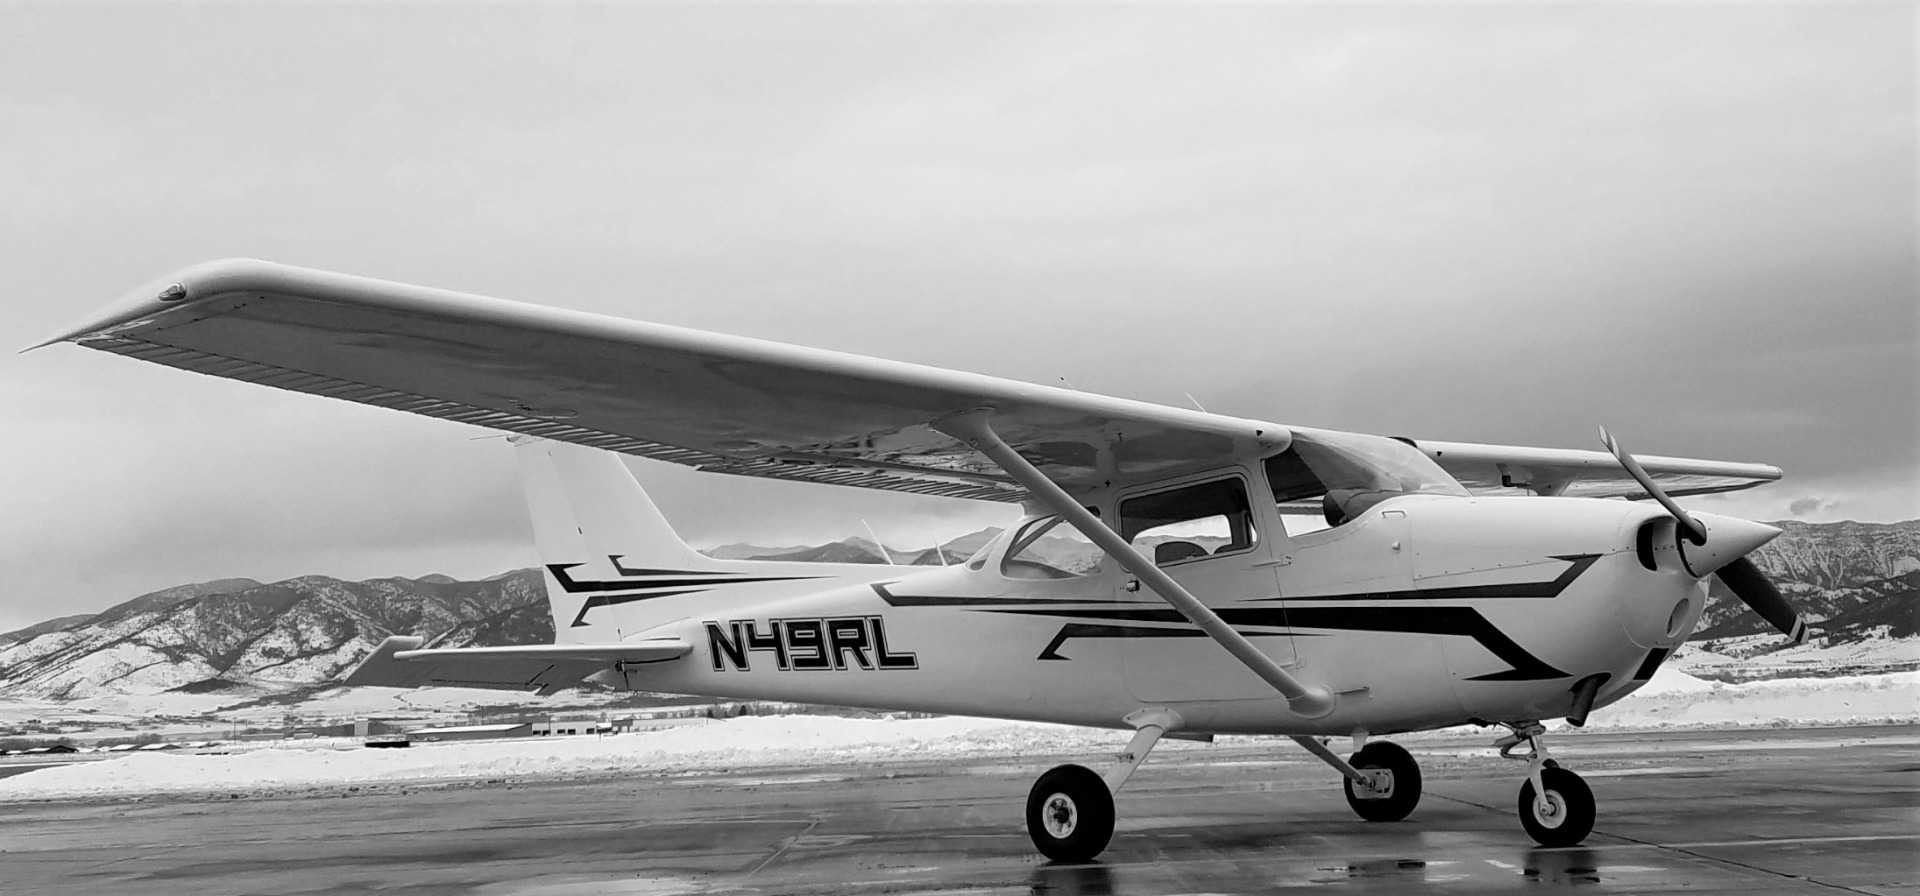 Cessna 172 sitting on the apron